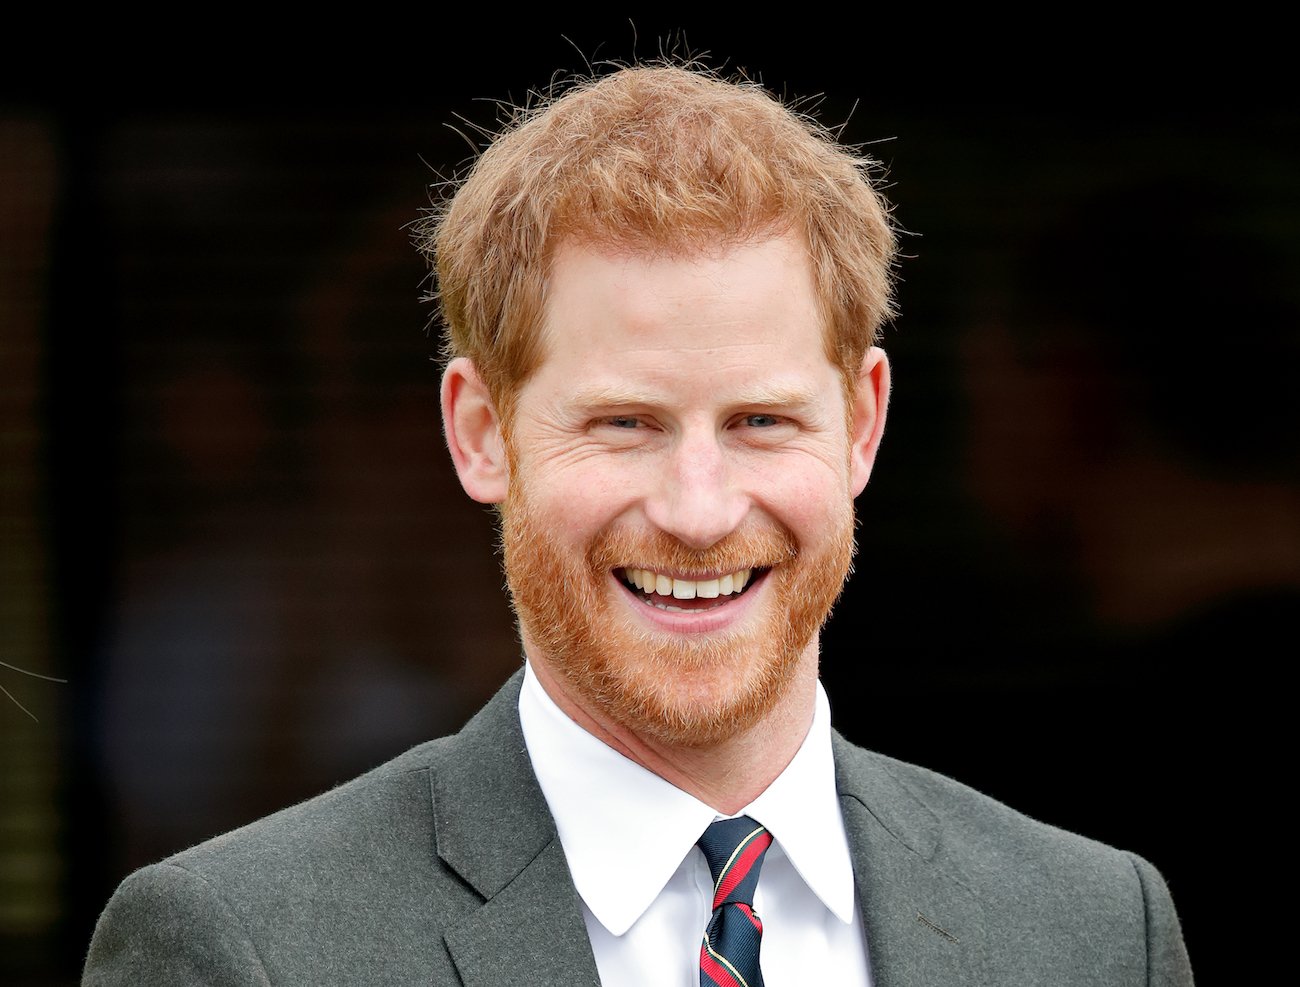 Prince Harry wearing a suit and grinning while looking toward the camera